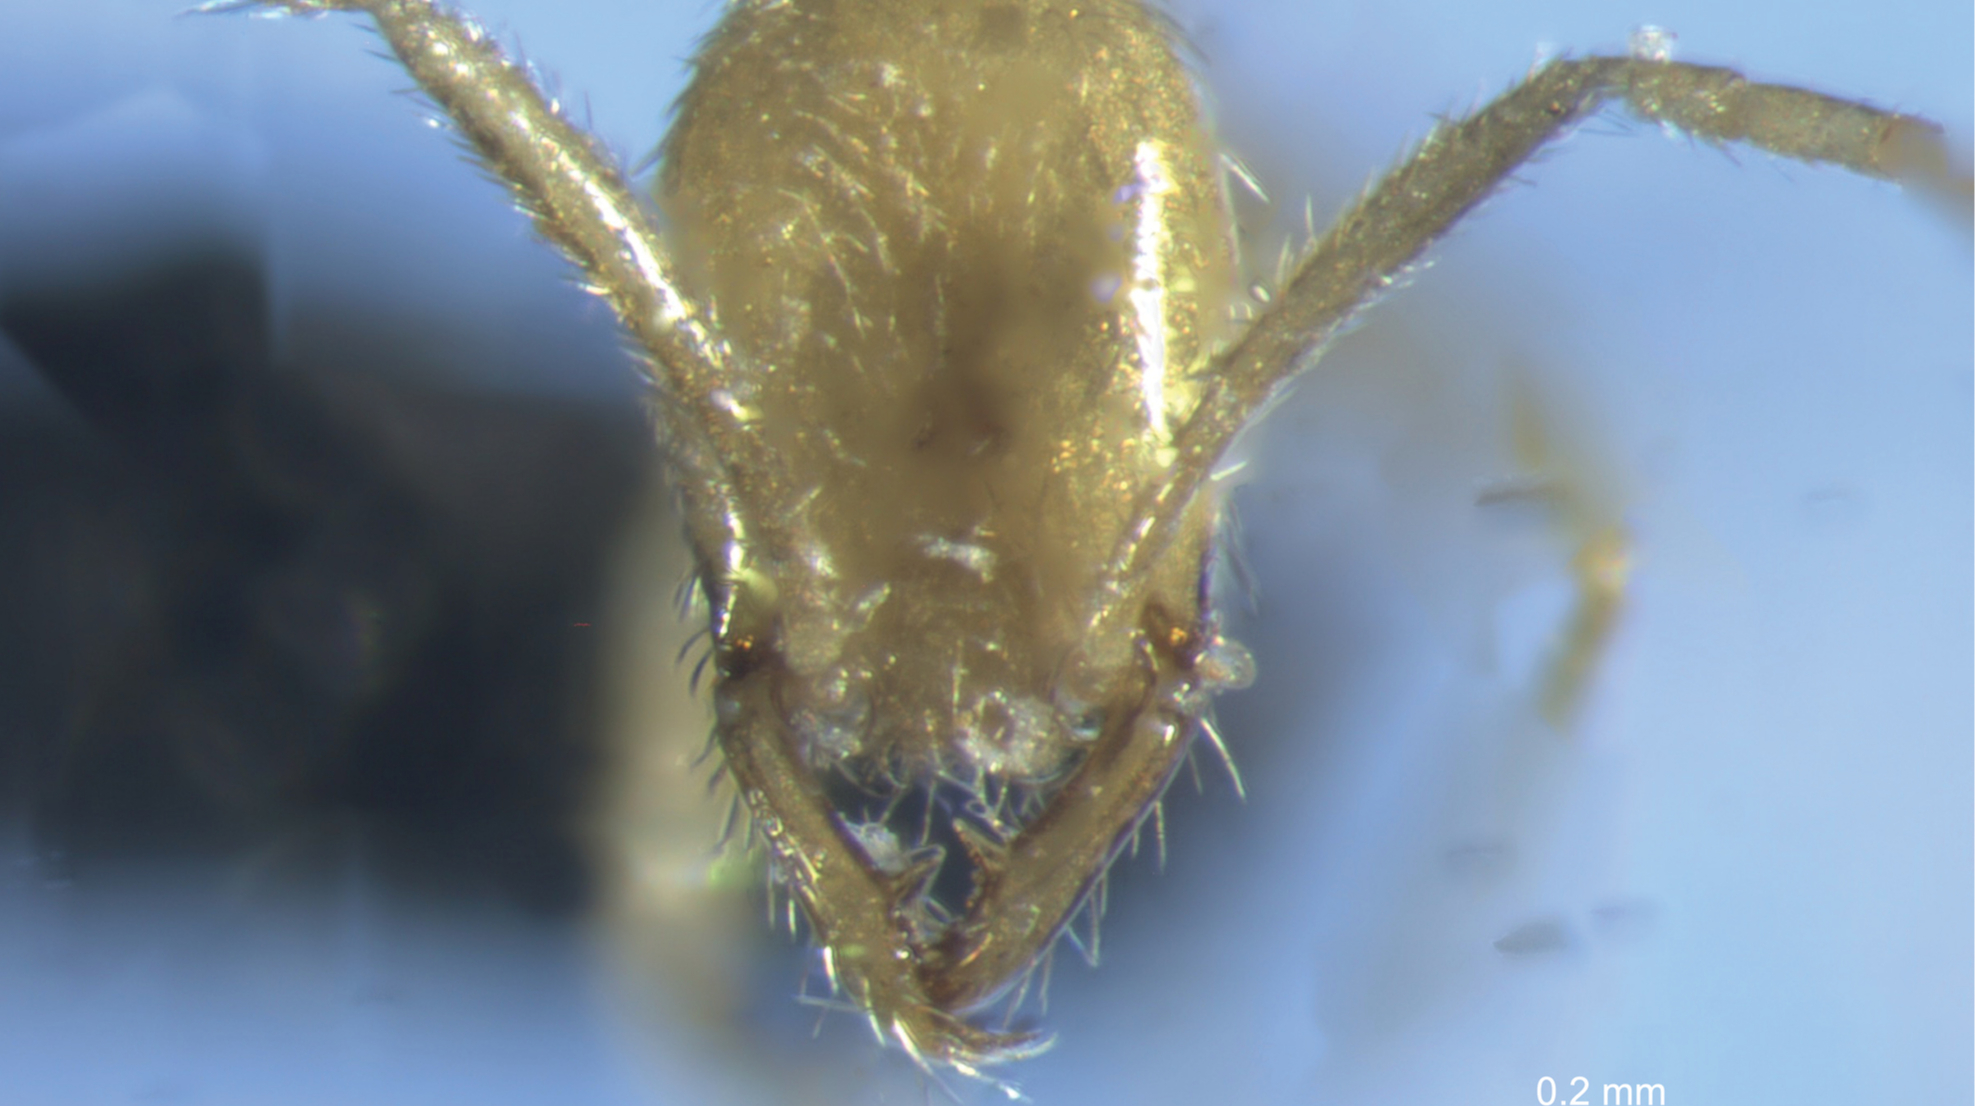 A new species of ant was discovered in Australia and named after Voldemort